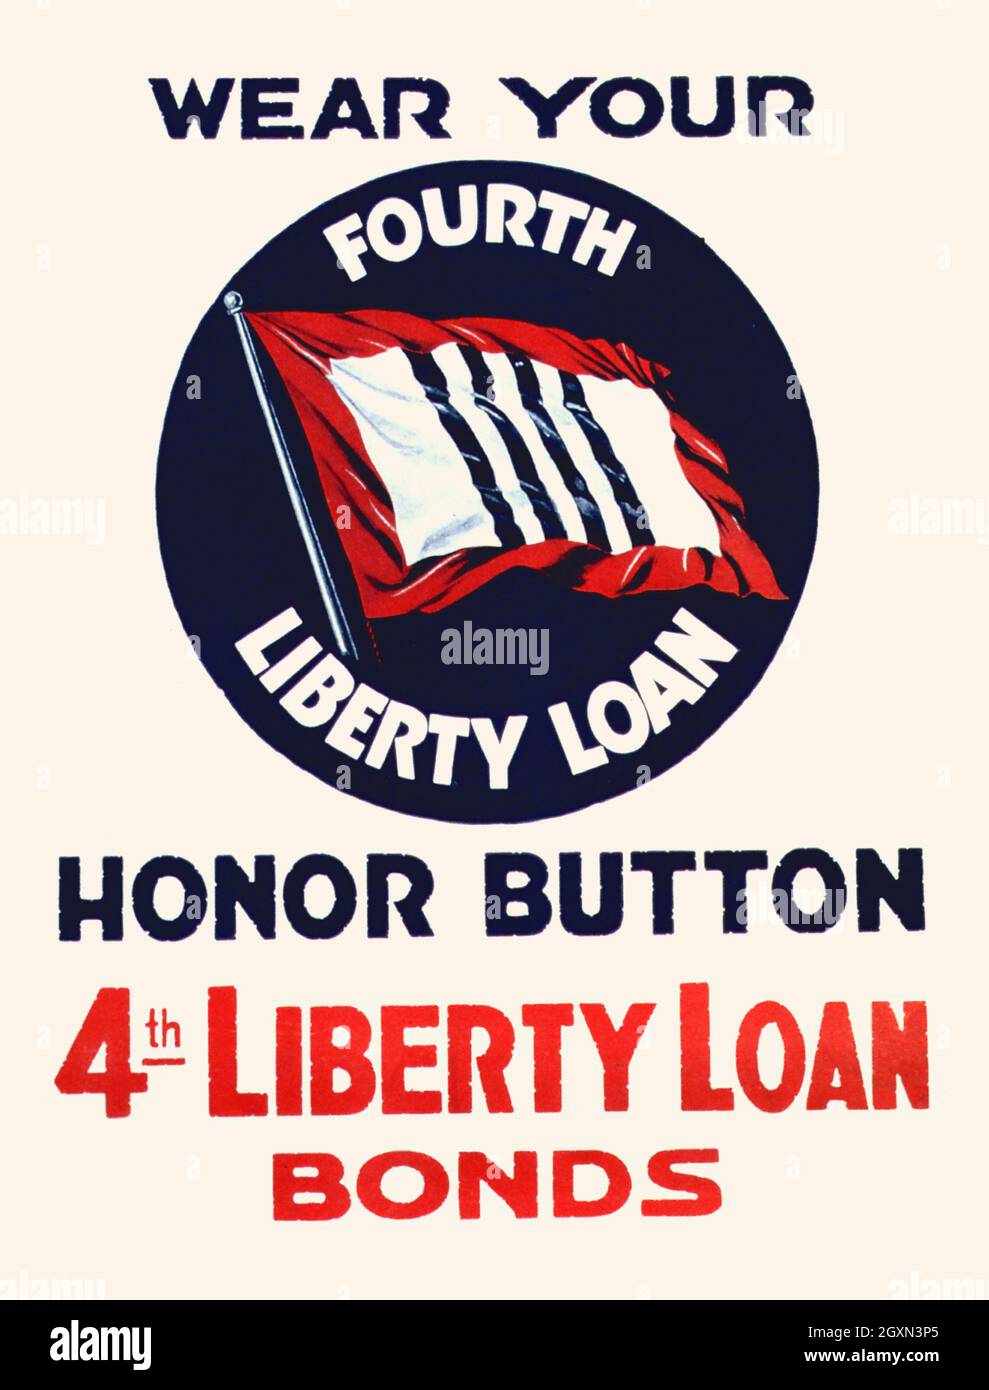 Wear Your Fourth Liberty Loan Honor Button Stock Photo